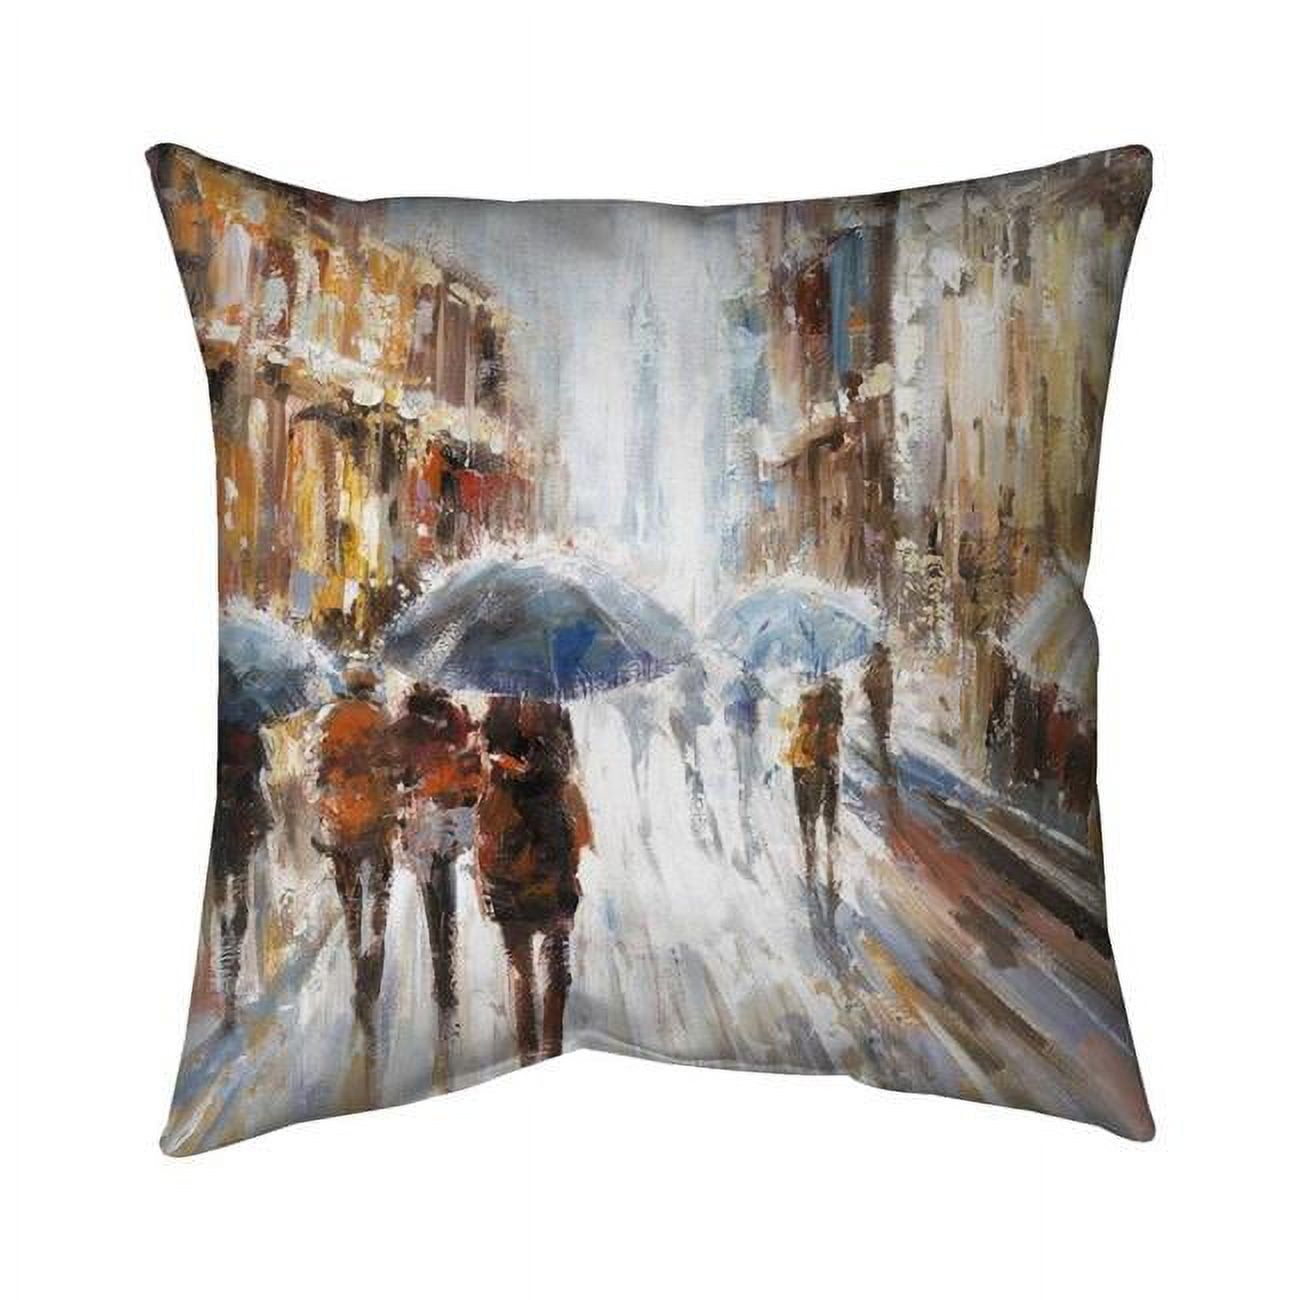 Begin Home Decor 5542-2020-CI168 20 x 20 in. Abstract Passersby in the City-Double Sided Print Outdoor Pillow Cover